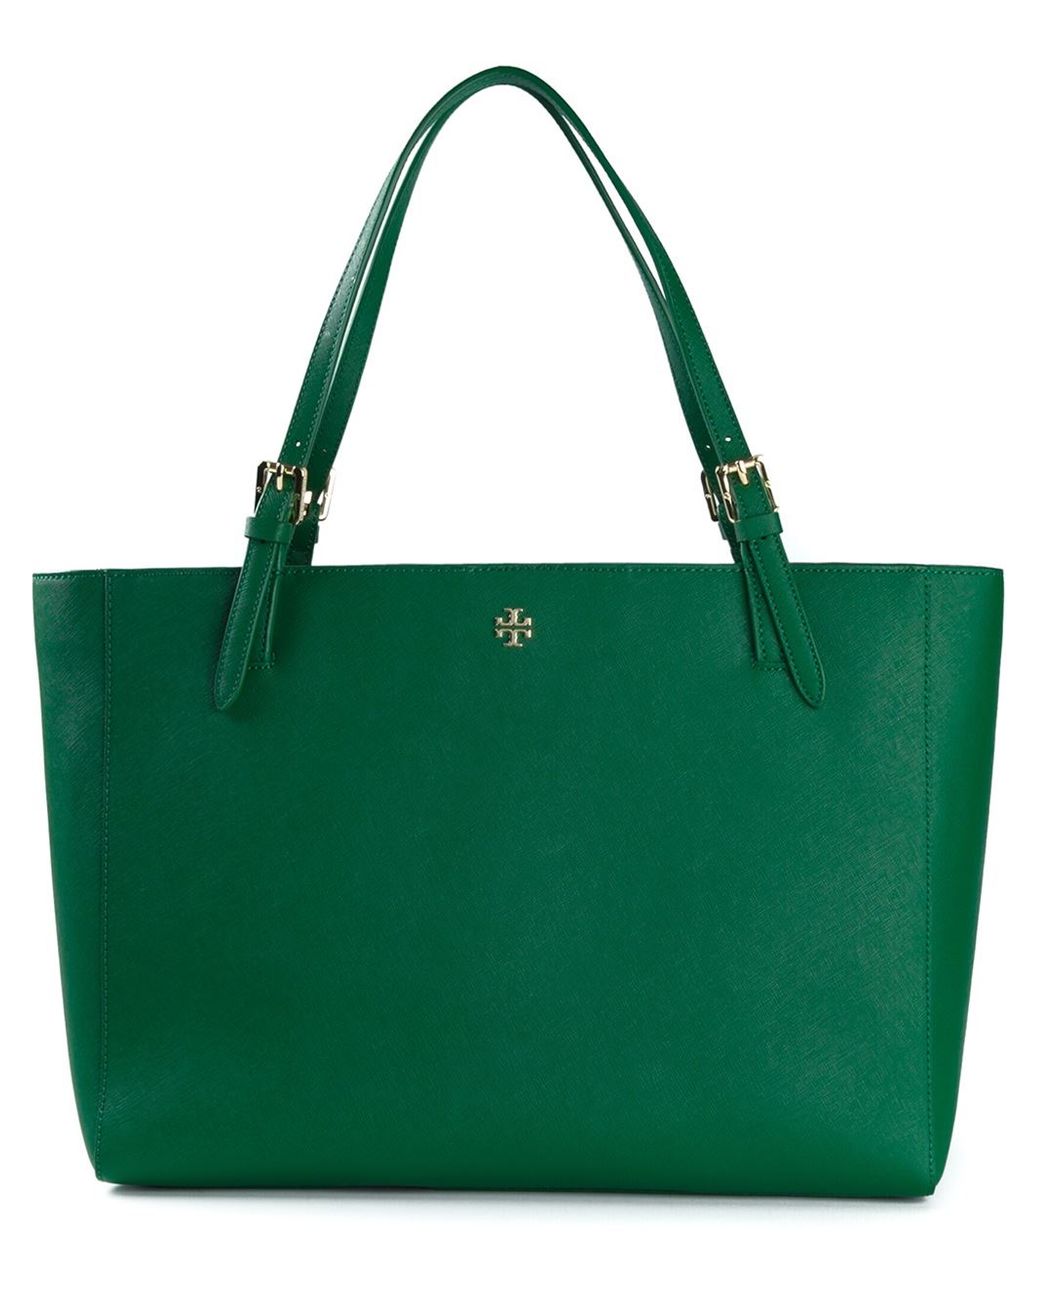 Tory Burch Large 'York' Shopper Tote in Green | Lyst